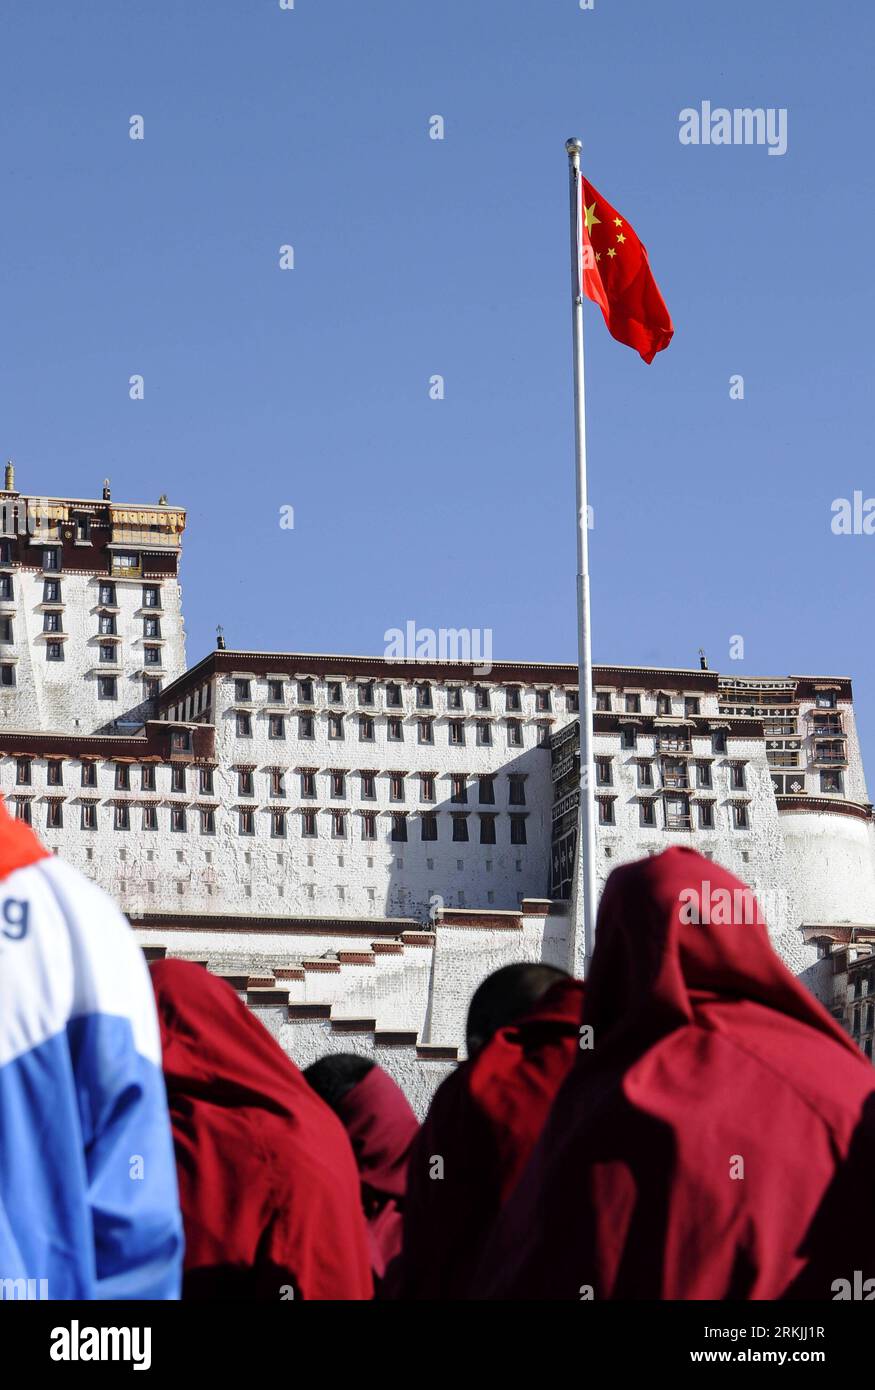 Bildnummer: 56139351  Datum: 01.10.2011  Copyright: imago/Xinhua (111001) -- LHASA, Oct. 1, 2011 (Xinhua) -- in religious circles take part in a flag raising ceremony in front of the Potala Palace in Lhasa, capital of southwest China s Tibet Autonomous Region, Oct. 1, 2011. More than 3,000 gathered in front of the Potala Palace in Lhasa to celebrate of the 62nd anniversary of the founding of the People s Republic of China. (Xinhua/Chogo) (zhs) CHINA-LHASA-NATIONAL DAY-CELEBRATIONS (CN) PUBLICATIONxNOTxINxCHN Gesellschaft Fahnenappell Fahne Nationalfahne Appell Feiertag Nationalfeiertag 62 xns Stock Photo